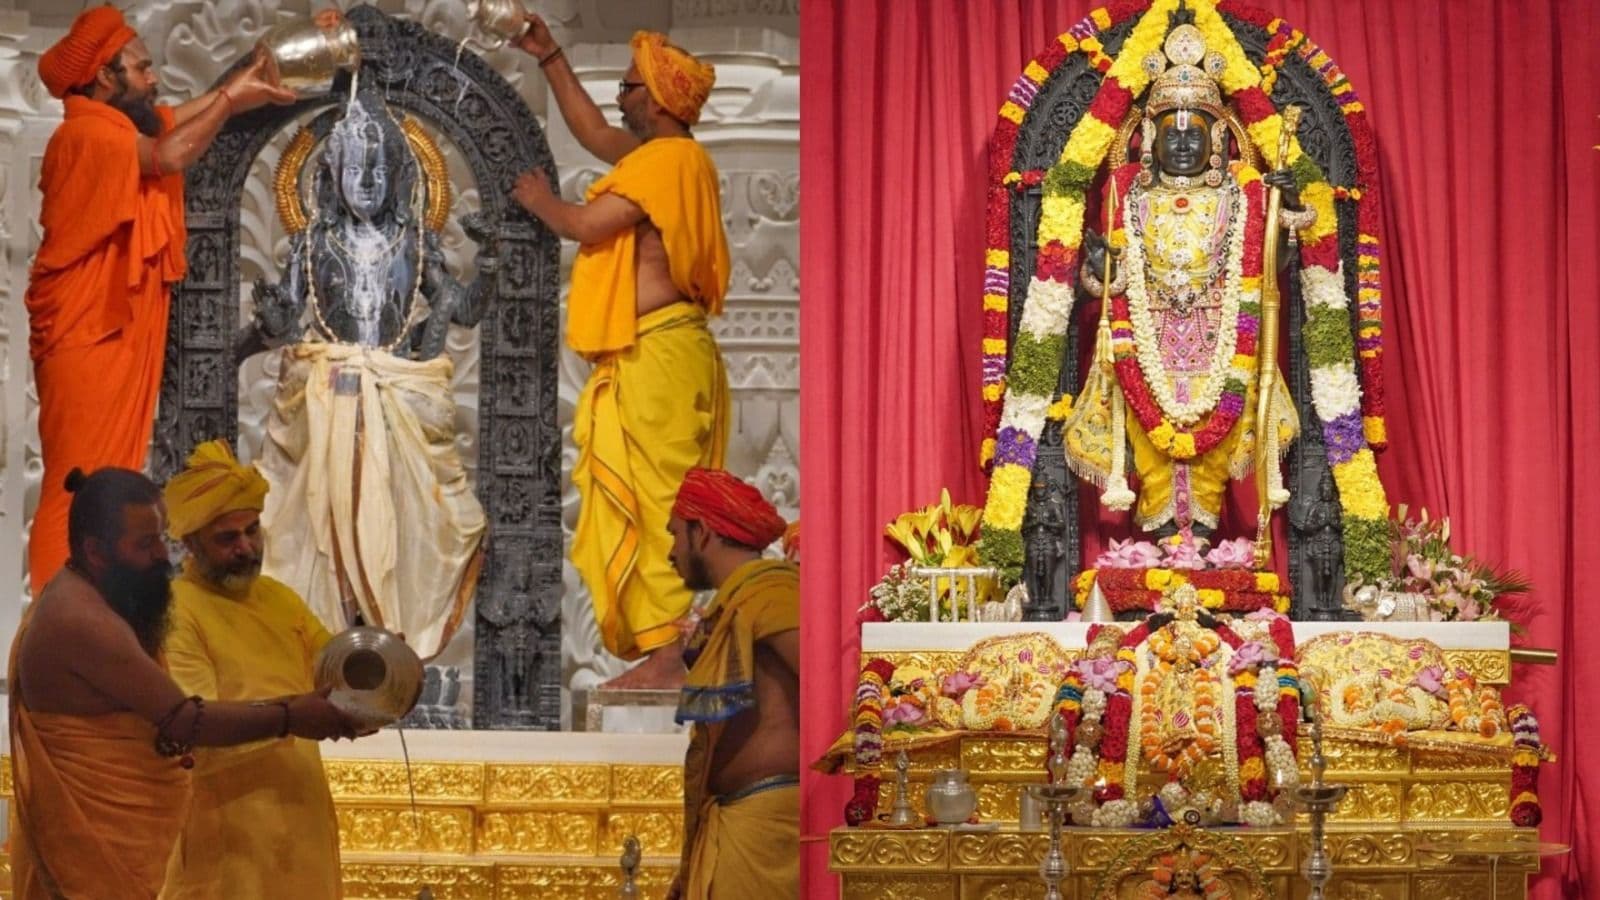 Special rituals performed on the occasion of Ram Navami in Ayodhya's Ram Janmbhoomi Mandir